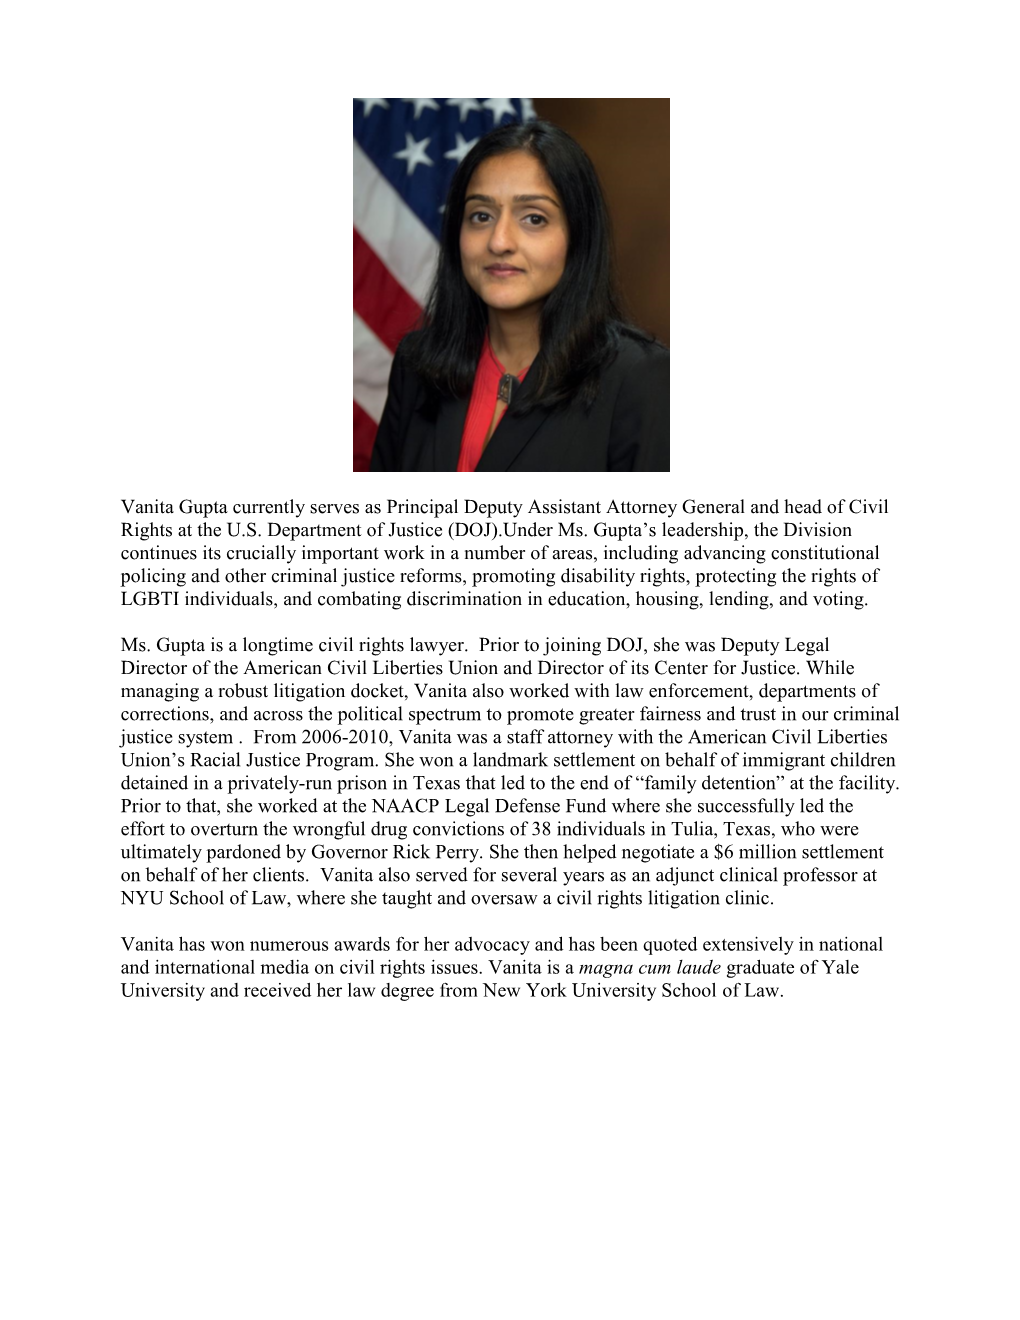 Vanita Gupta Currently Serves As Principal Deputy Assistant Attorney General and Head of Civil Rights at the U.S